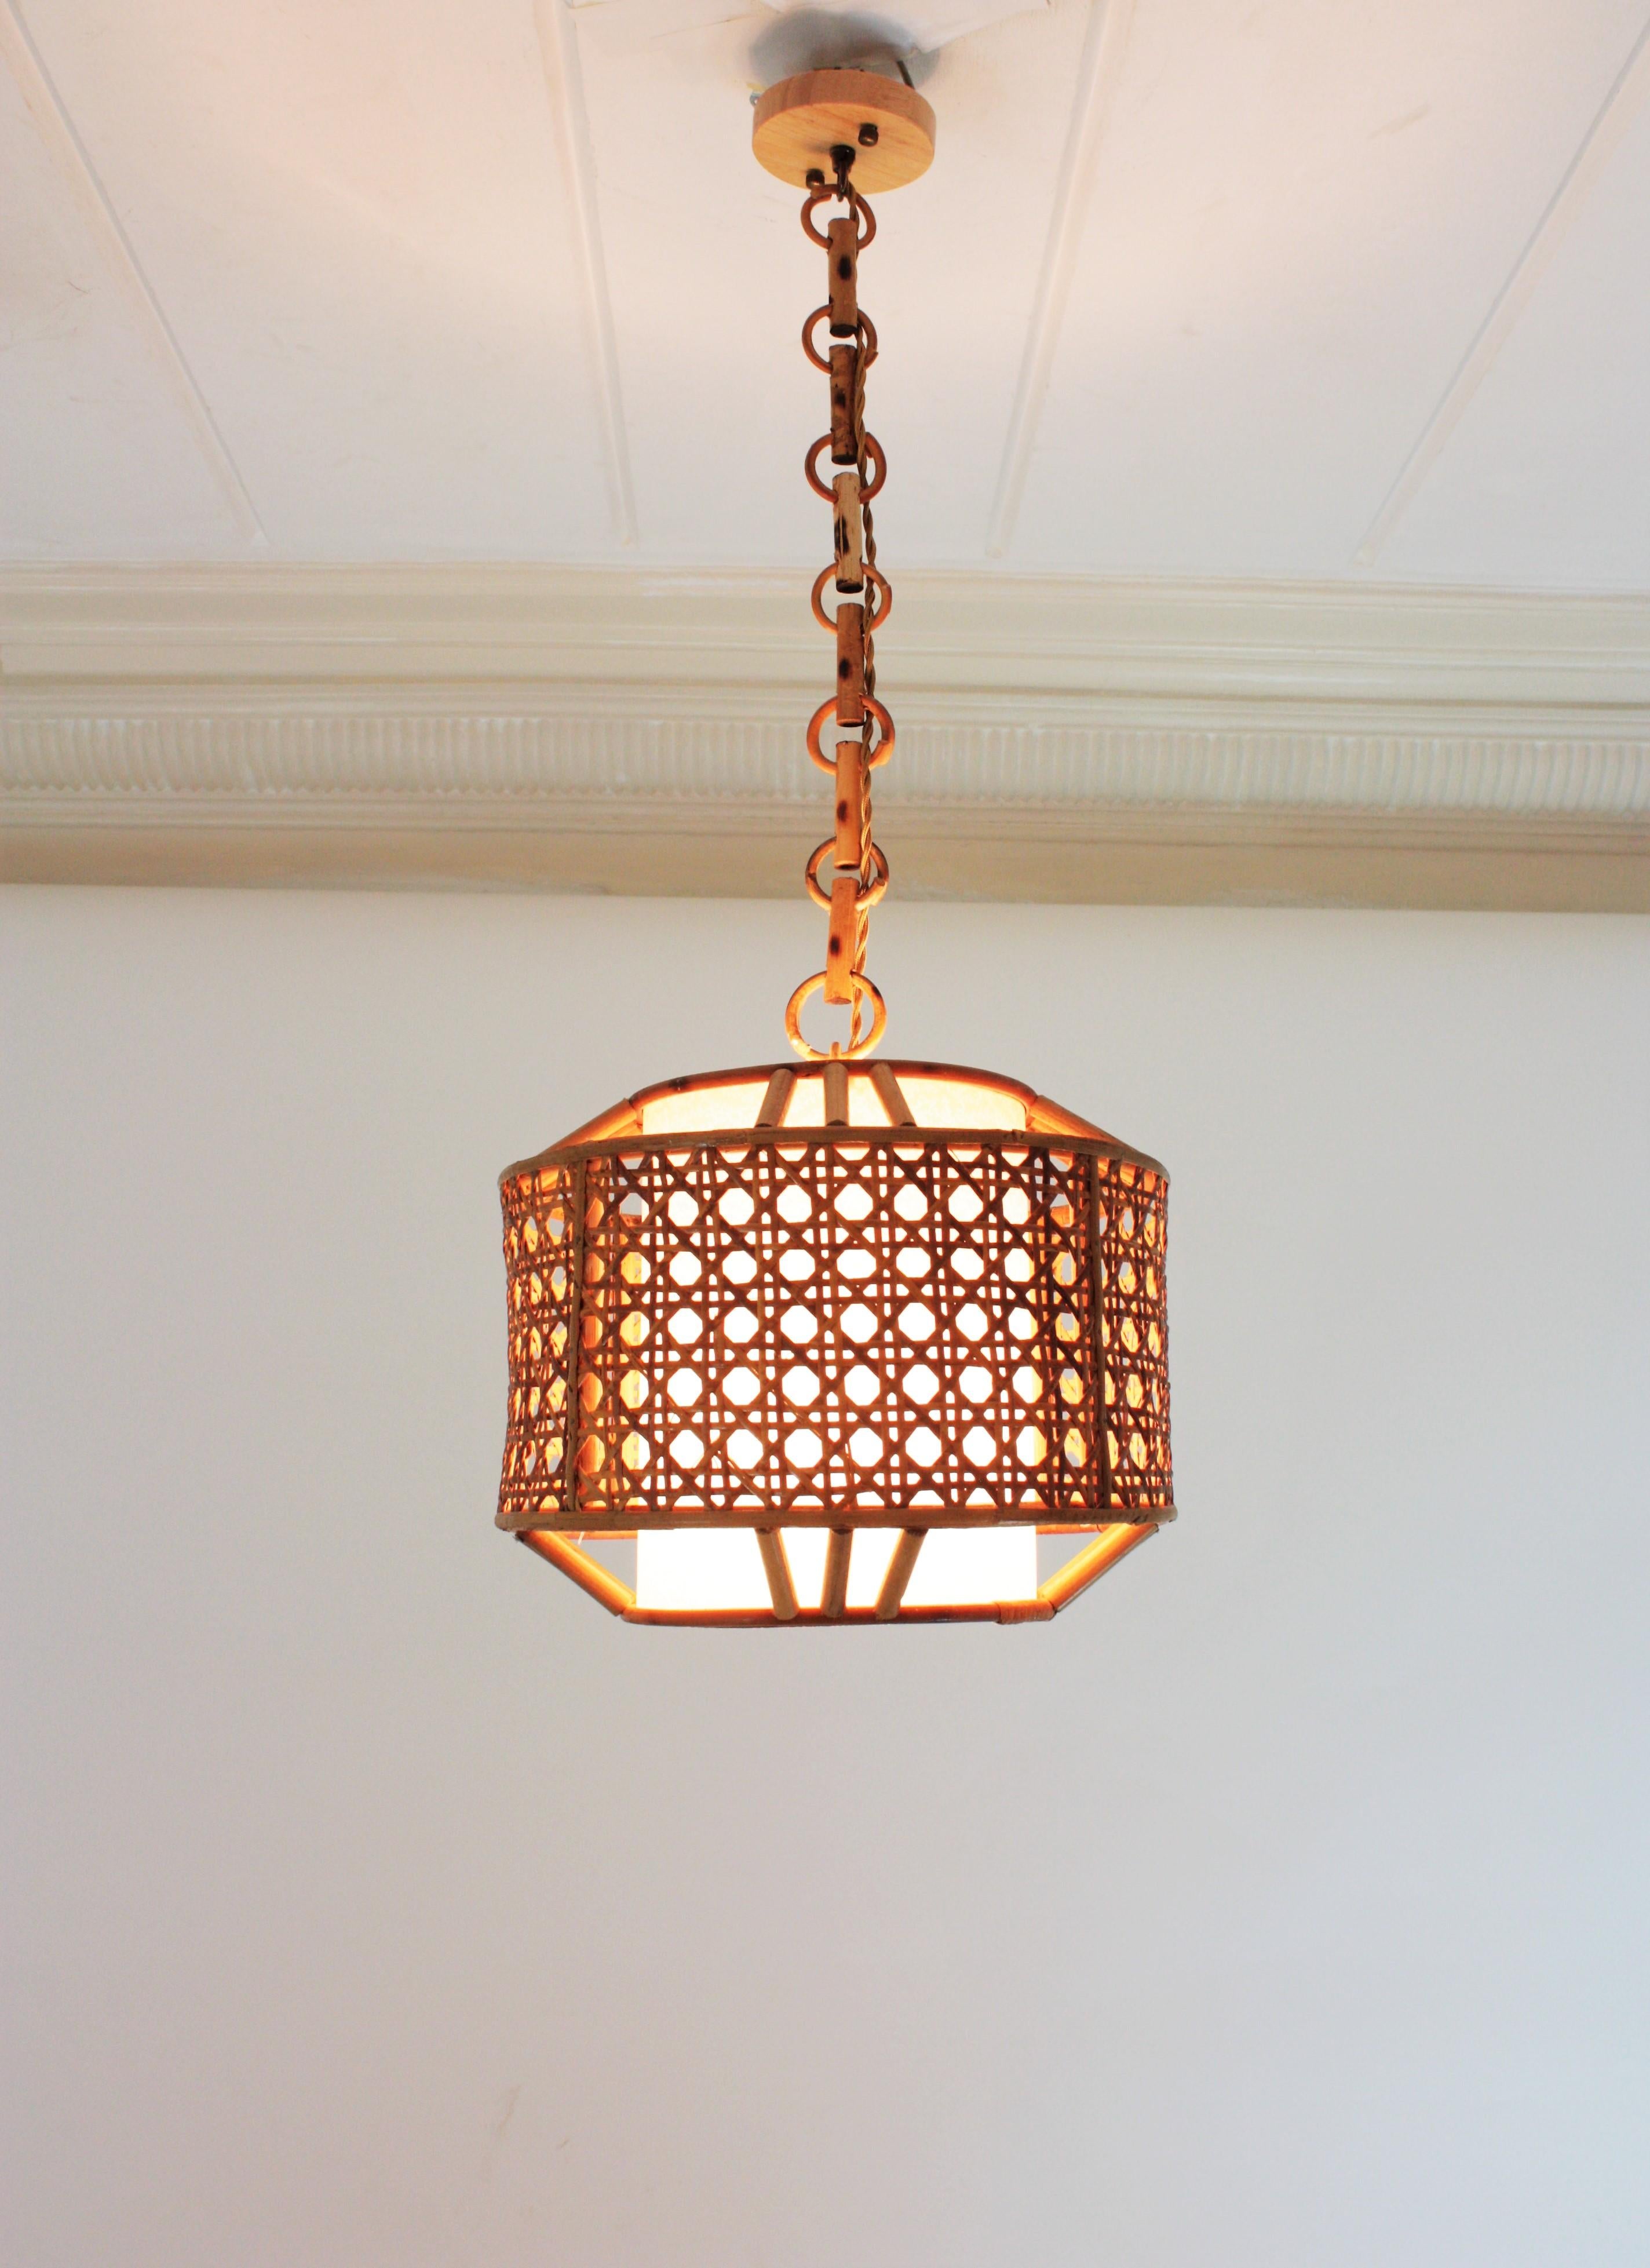 Mid-Century Modern Bamboo Rattan and Wicker Weave Drum Pendant Light or Lantern  For Sale